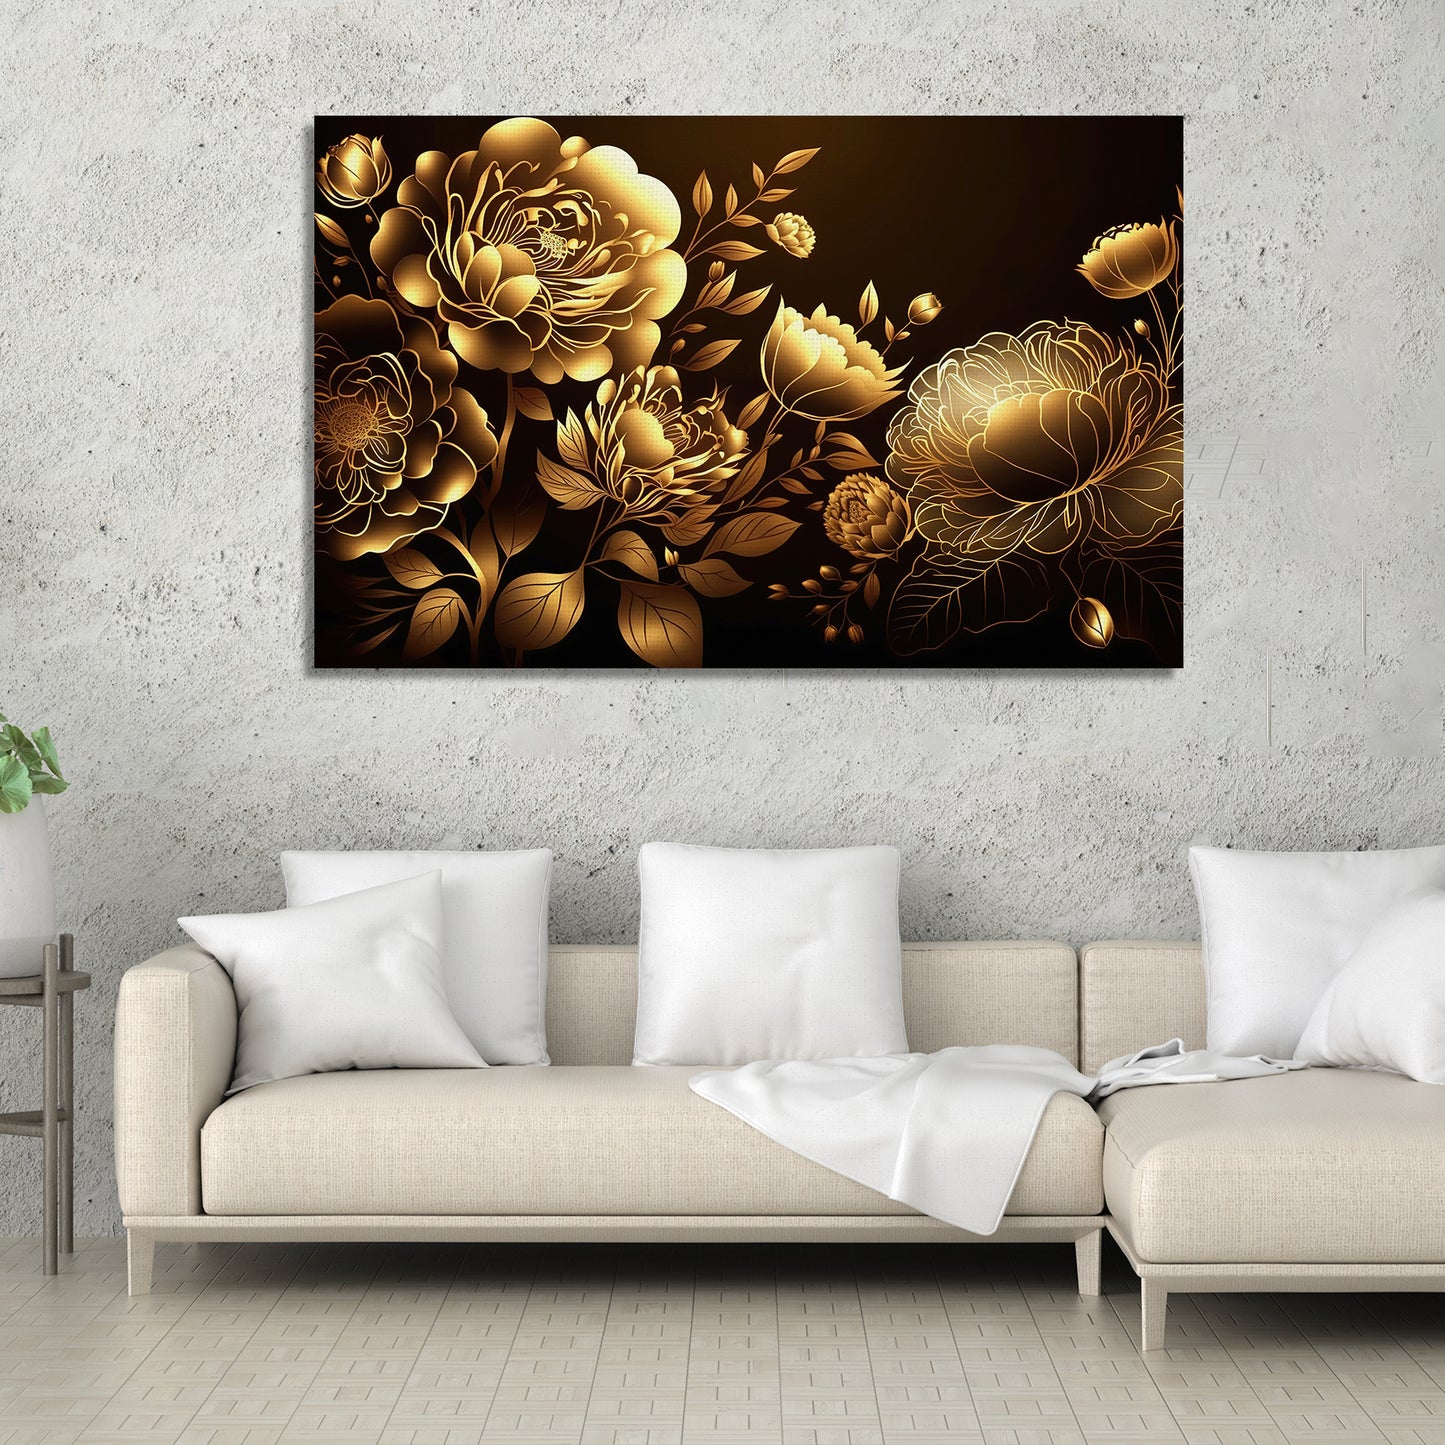 Luxury Golden Flower Canvas Painting for Living Room Bedroom Home Wall Decor